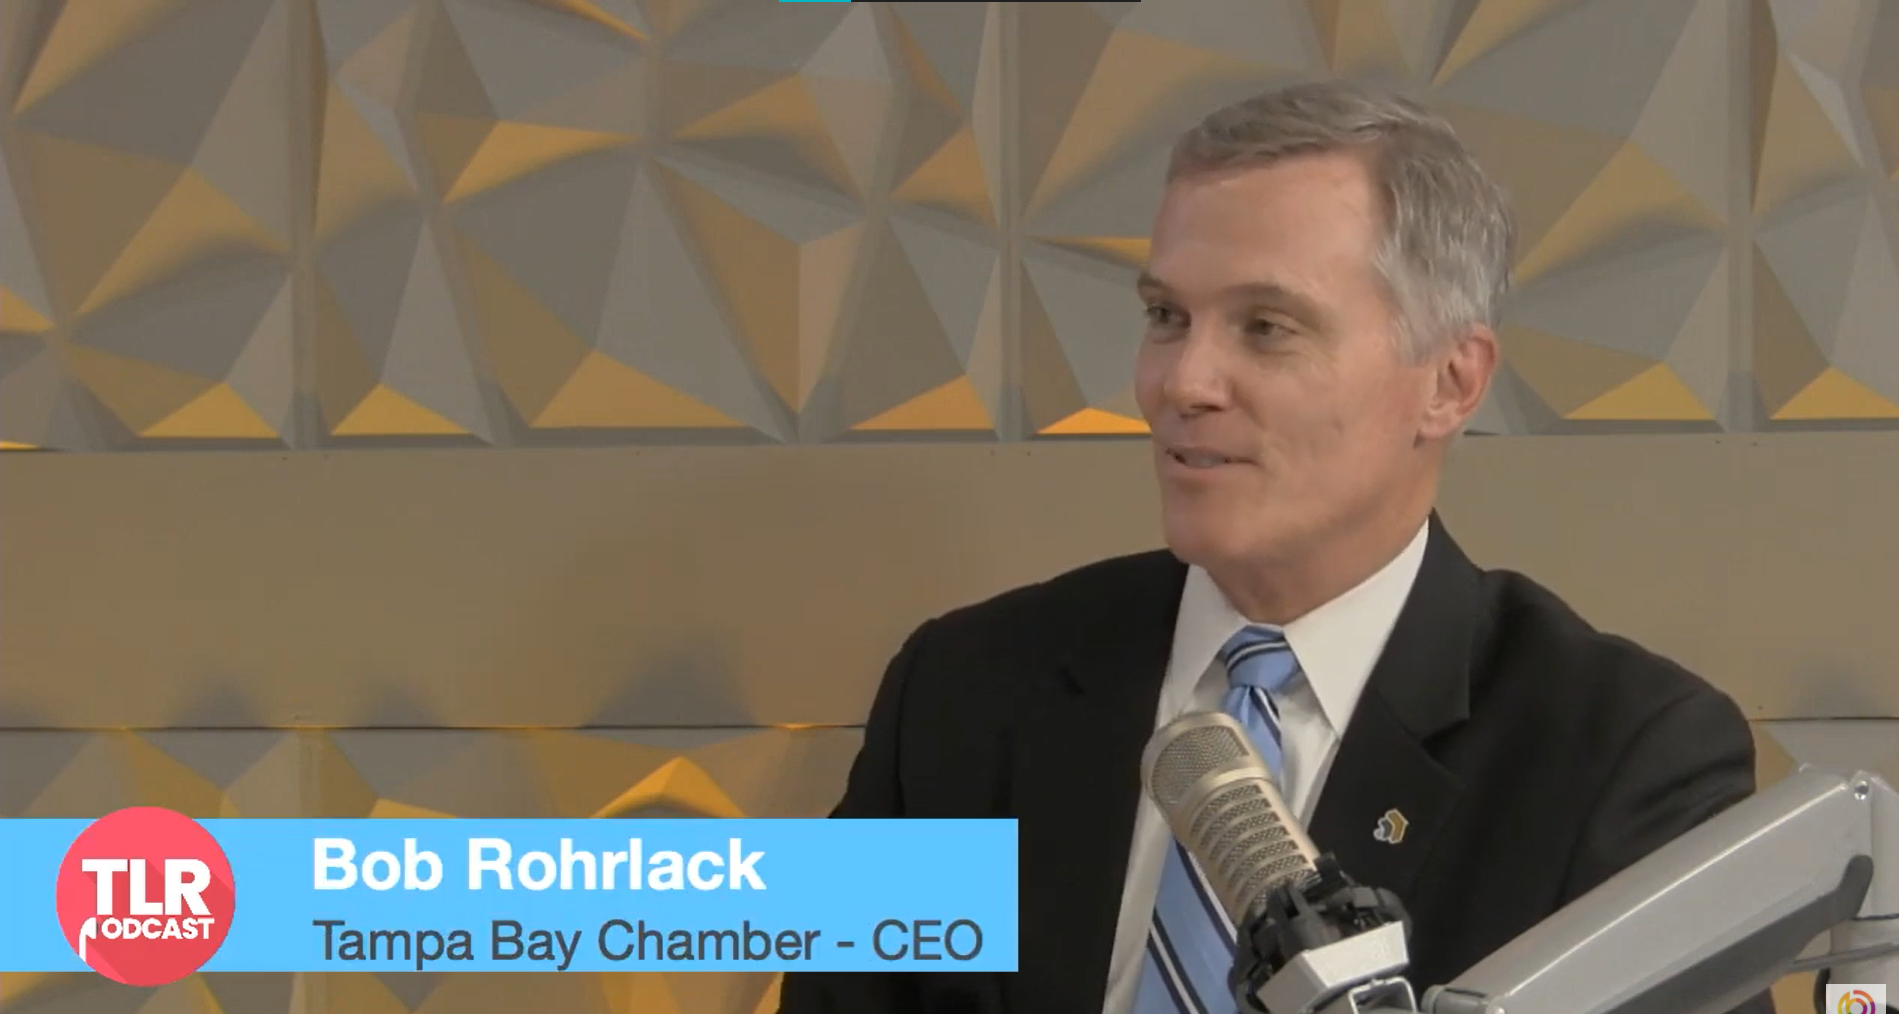 Episode 7 – The Law of Relevancy With Bob Rohrlack: Tampa Bay Chamber Rebrand